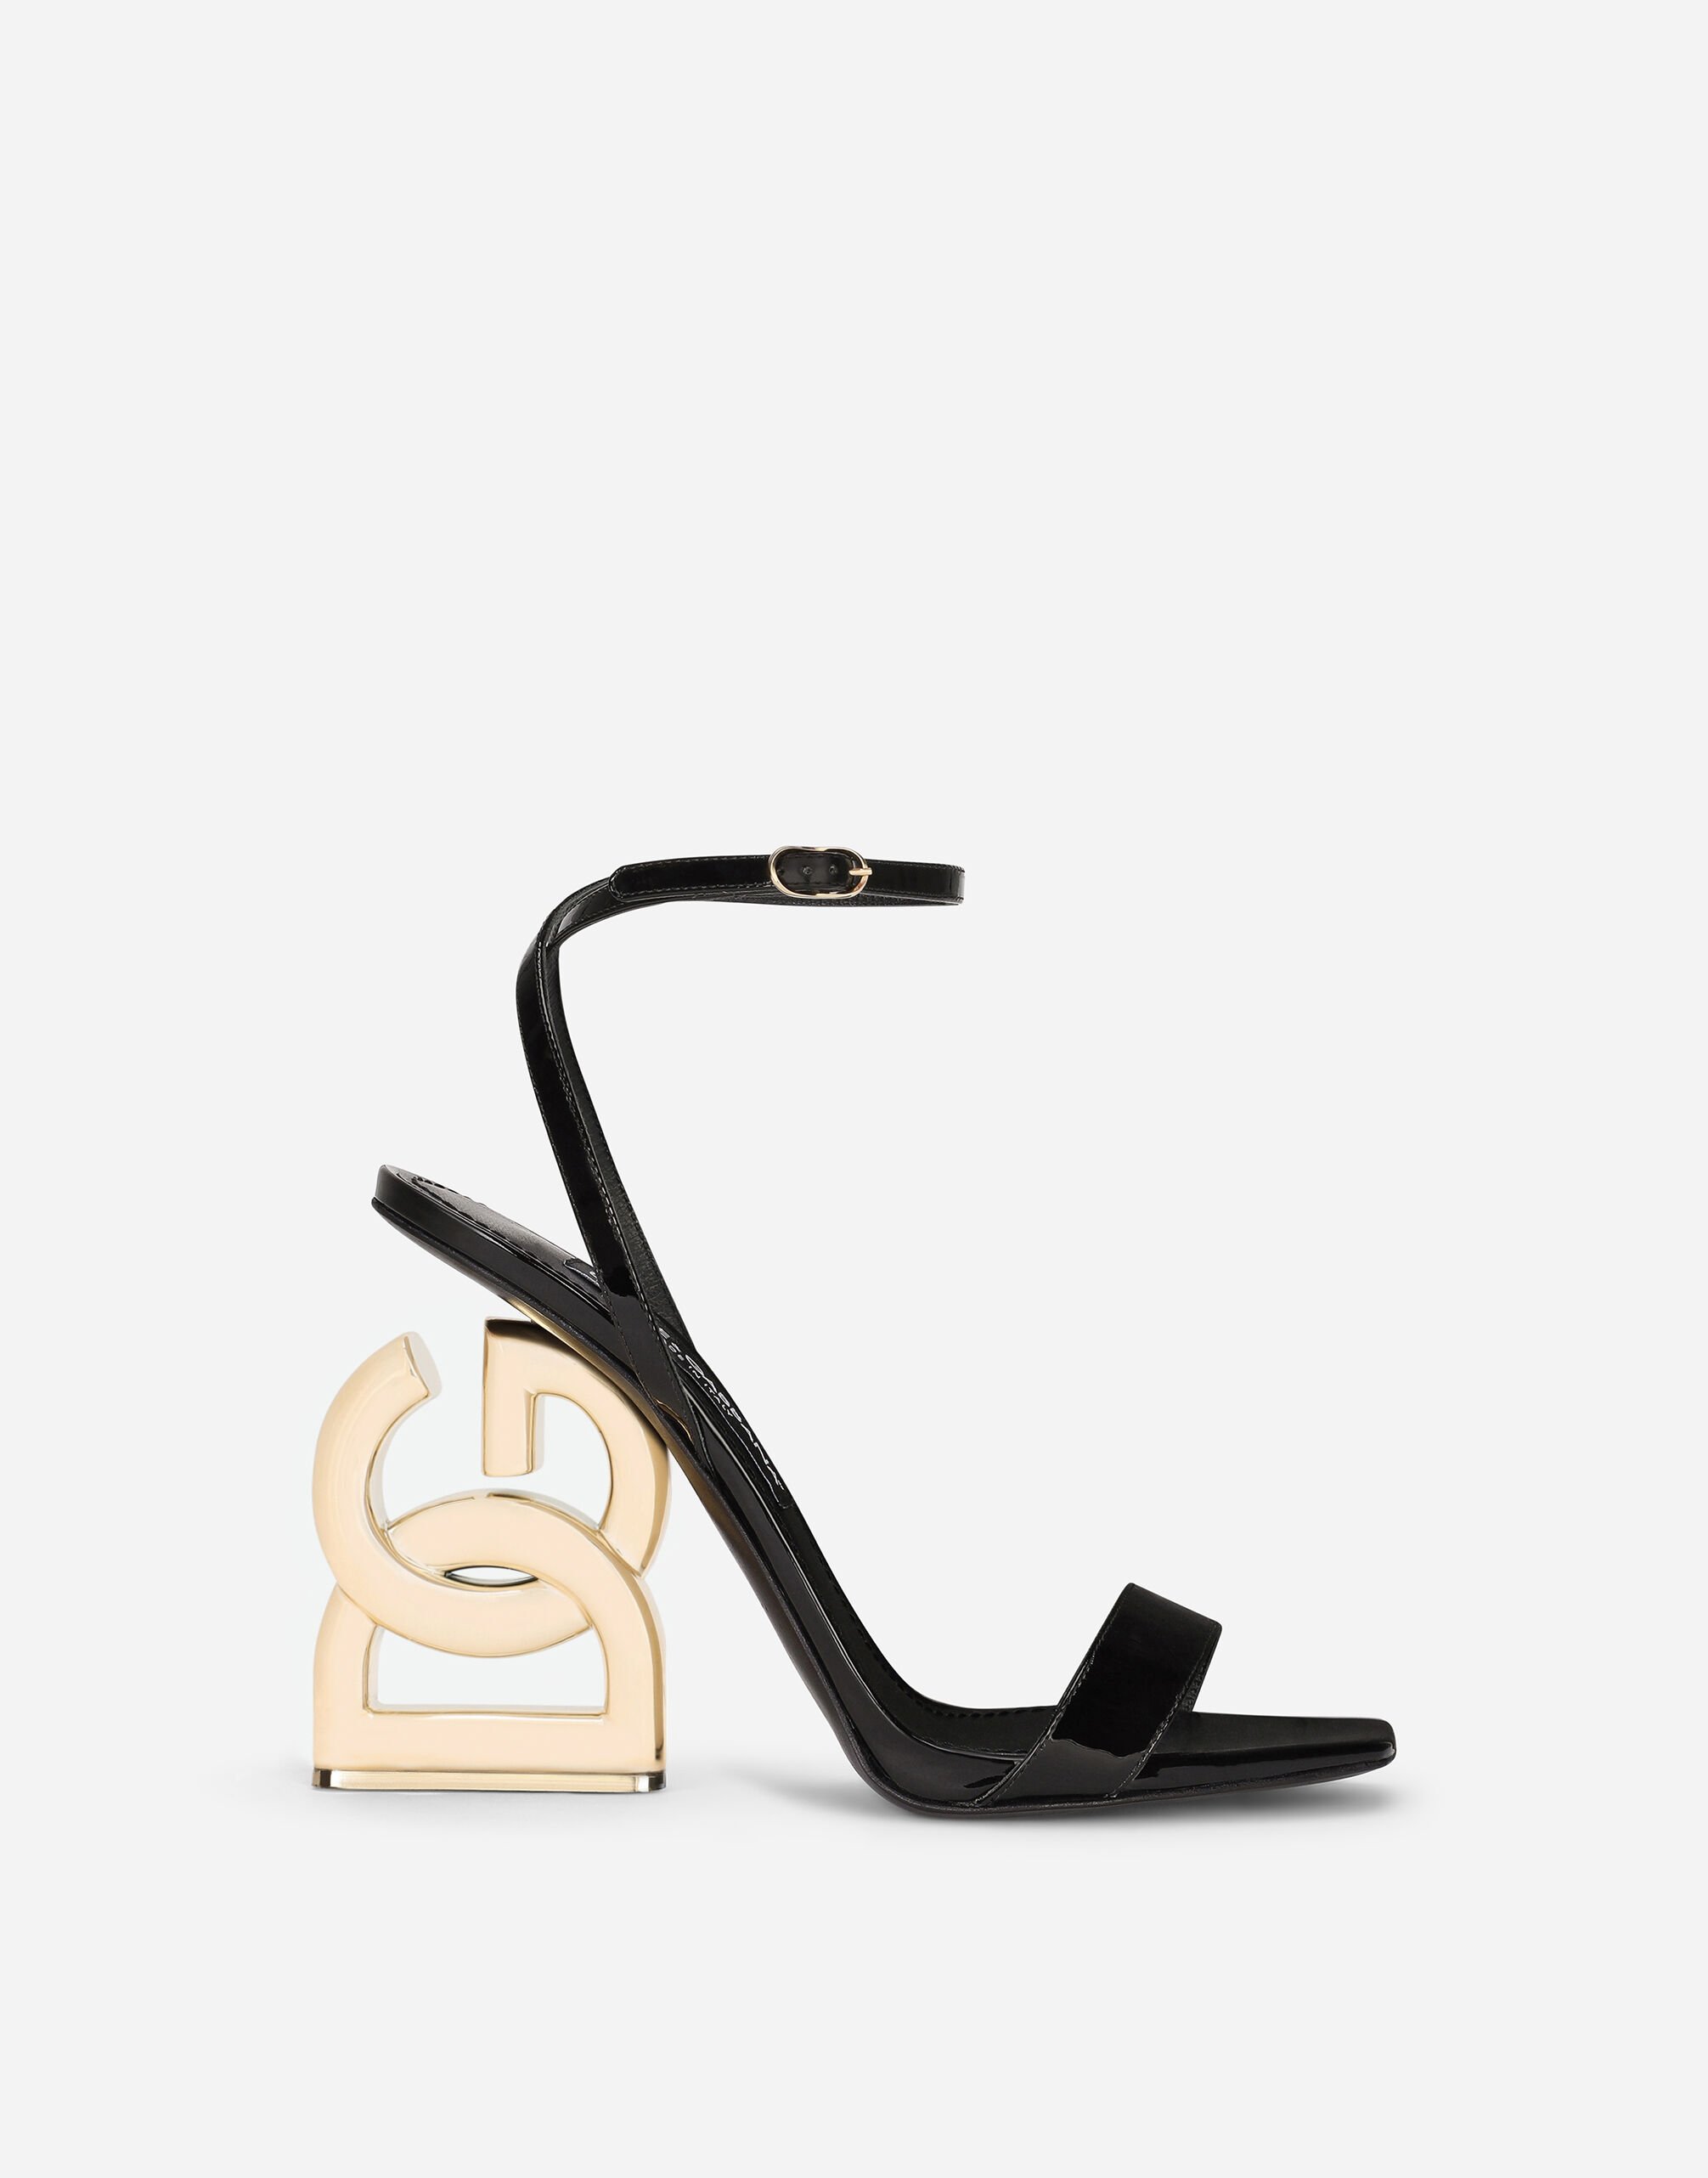 Patent leather sandals